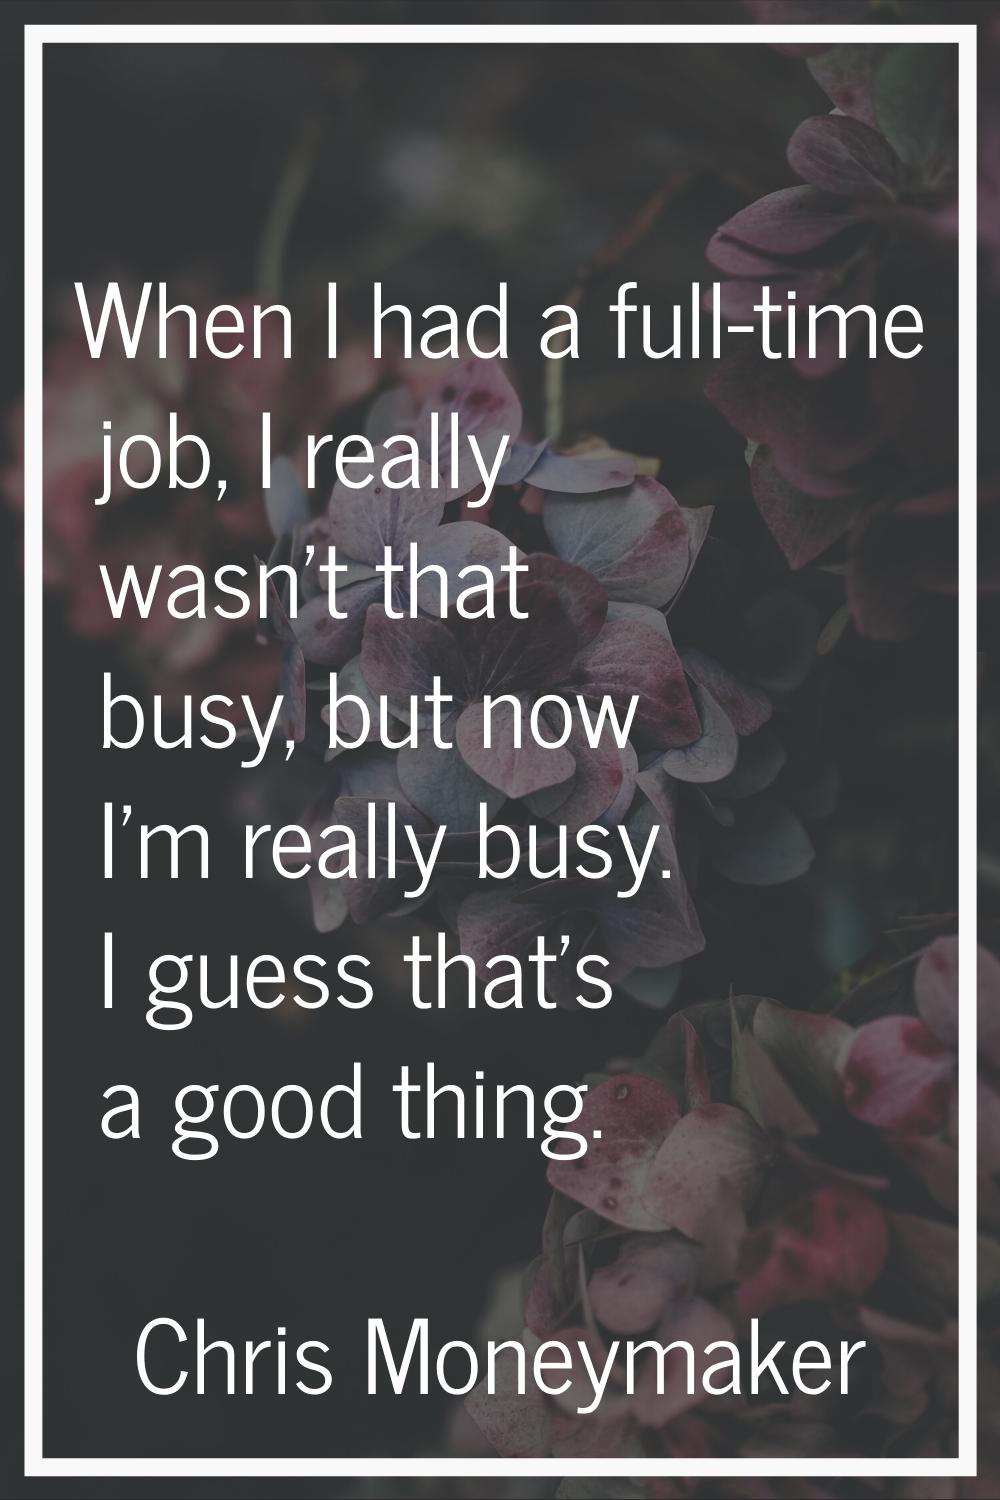 When I had a full-time job, I really wasn't that busy, but now I'm really busy. I guess that's a go